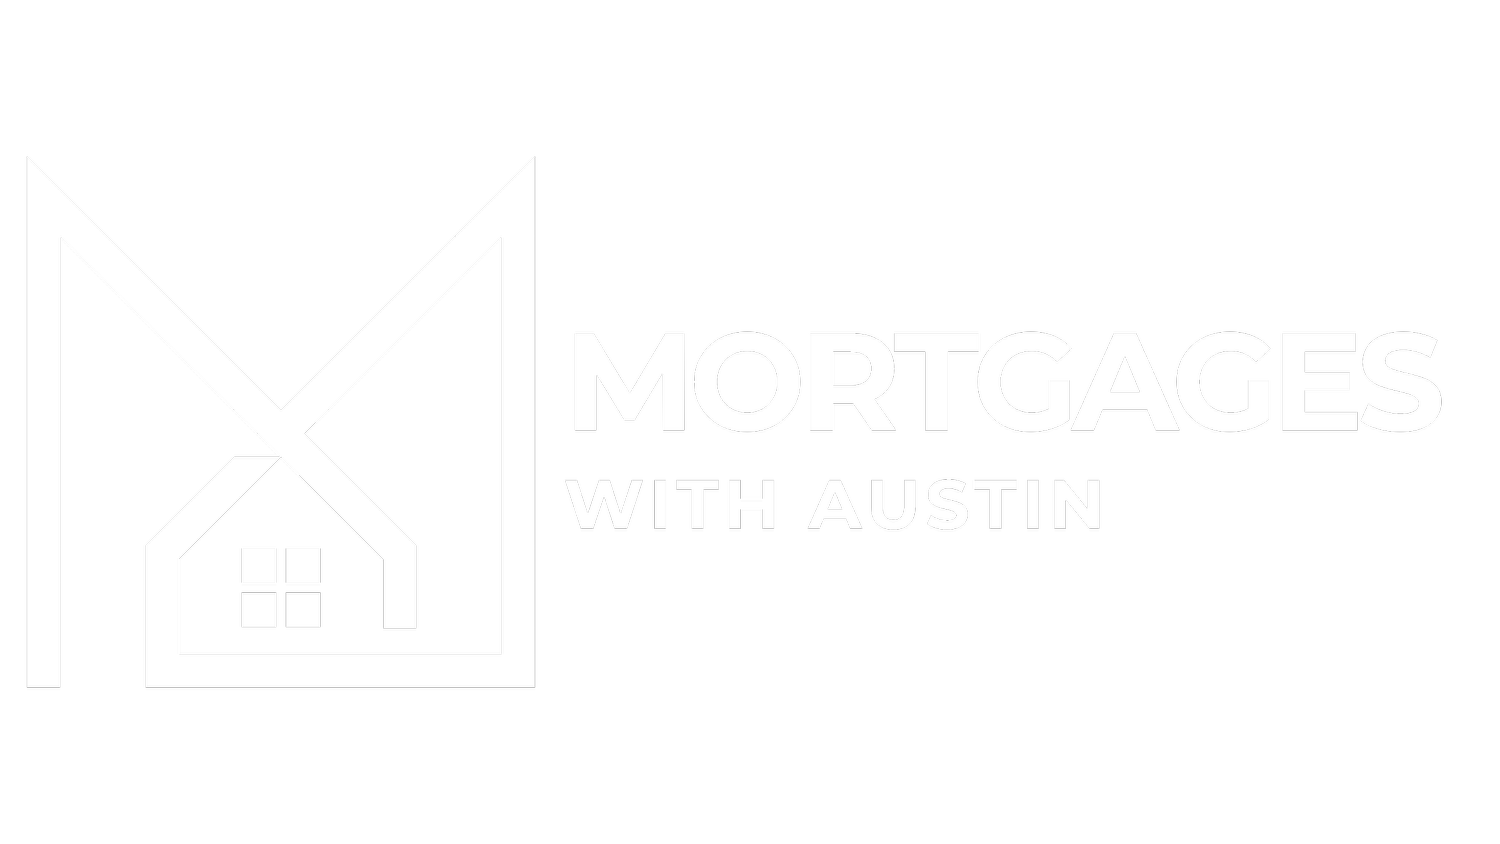 Mortgages with Austin